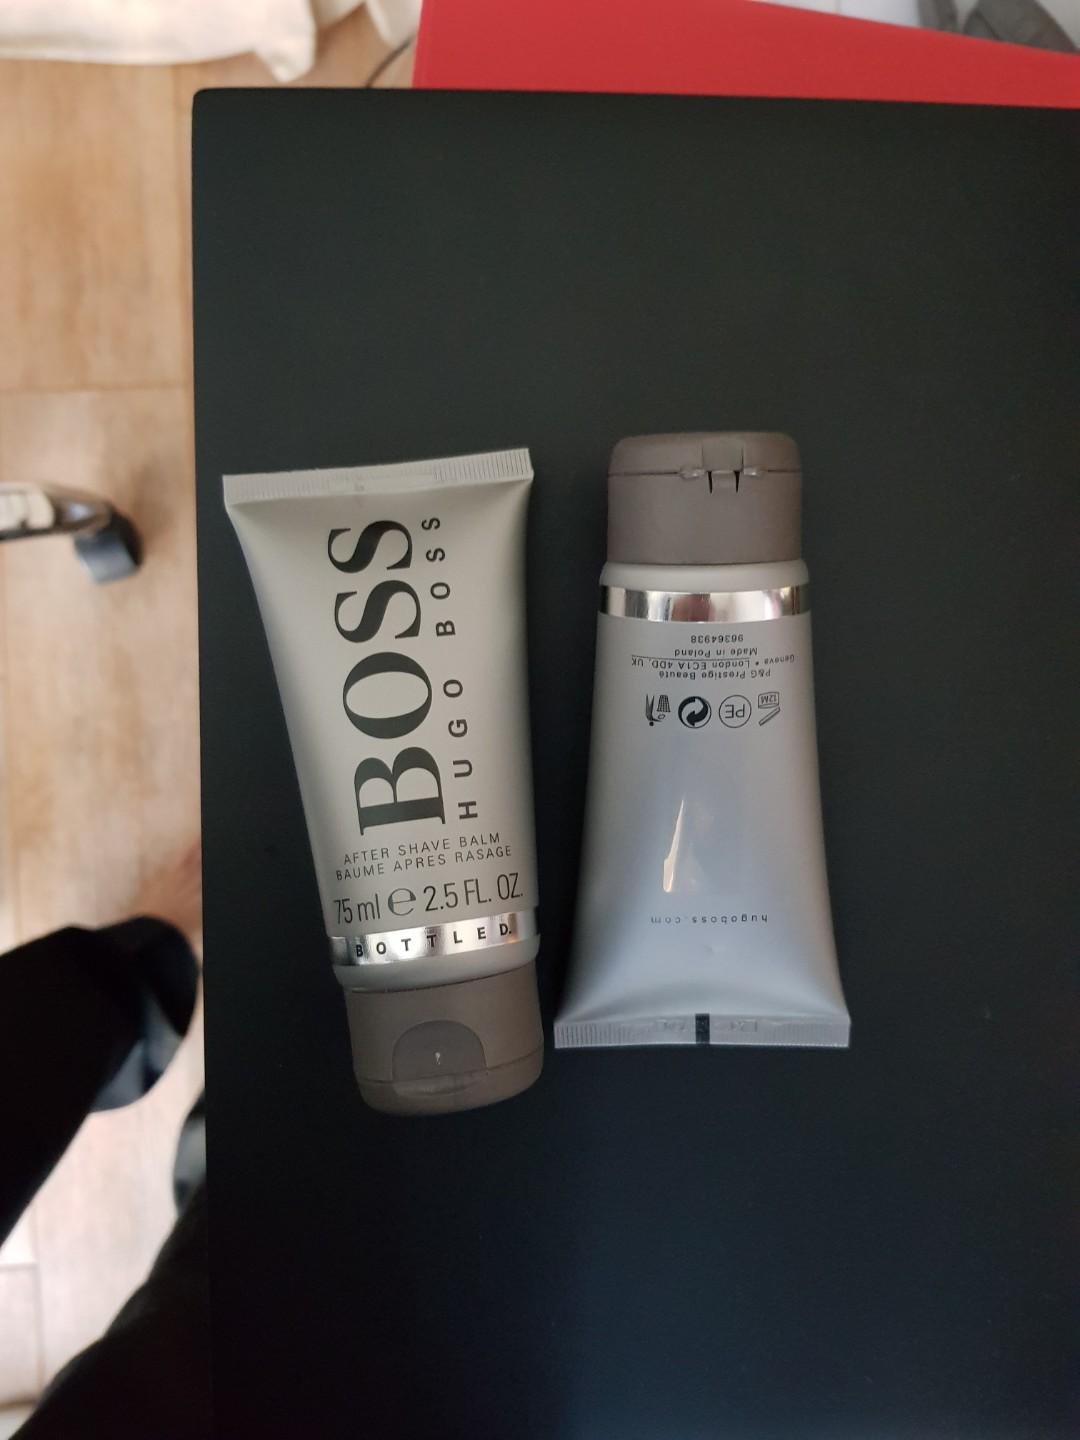 boss after shave balm